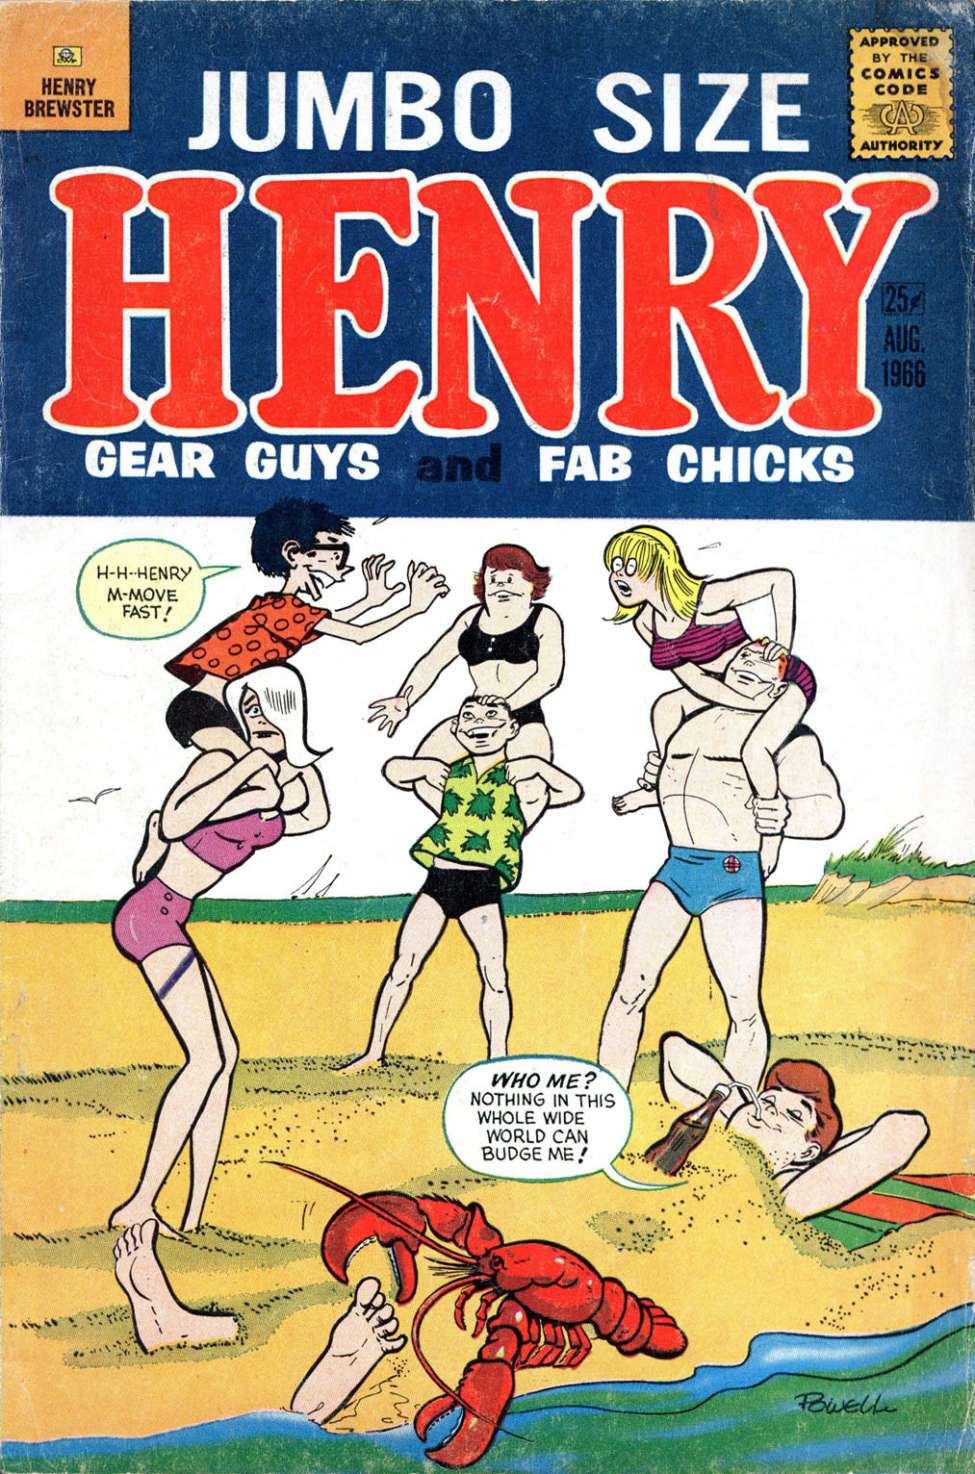 Comic Book Cover For Henry Brewster 4